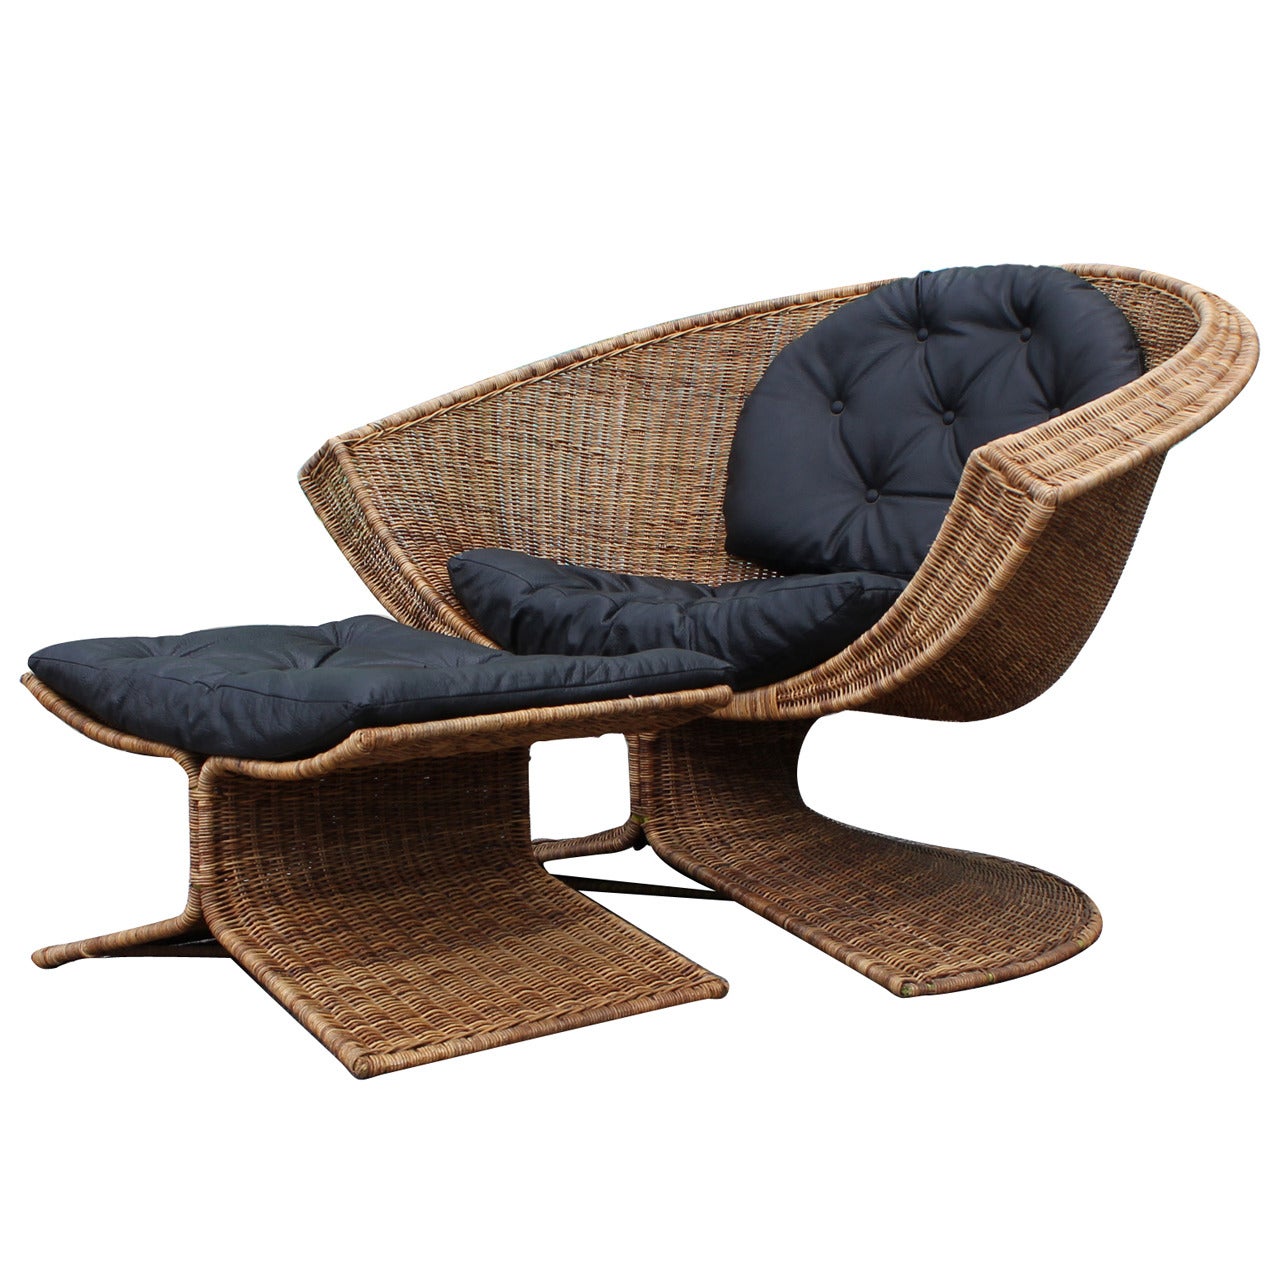 Lotus Chair and Ottoman by Miller Yee Fong for Tropi-Cal